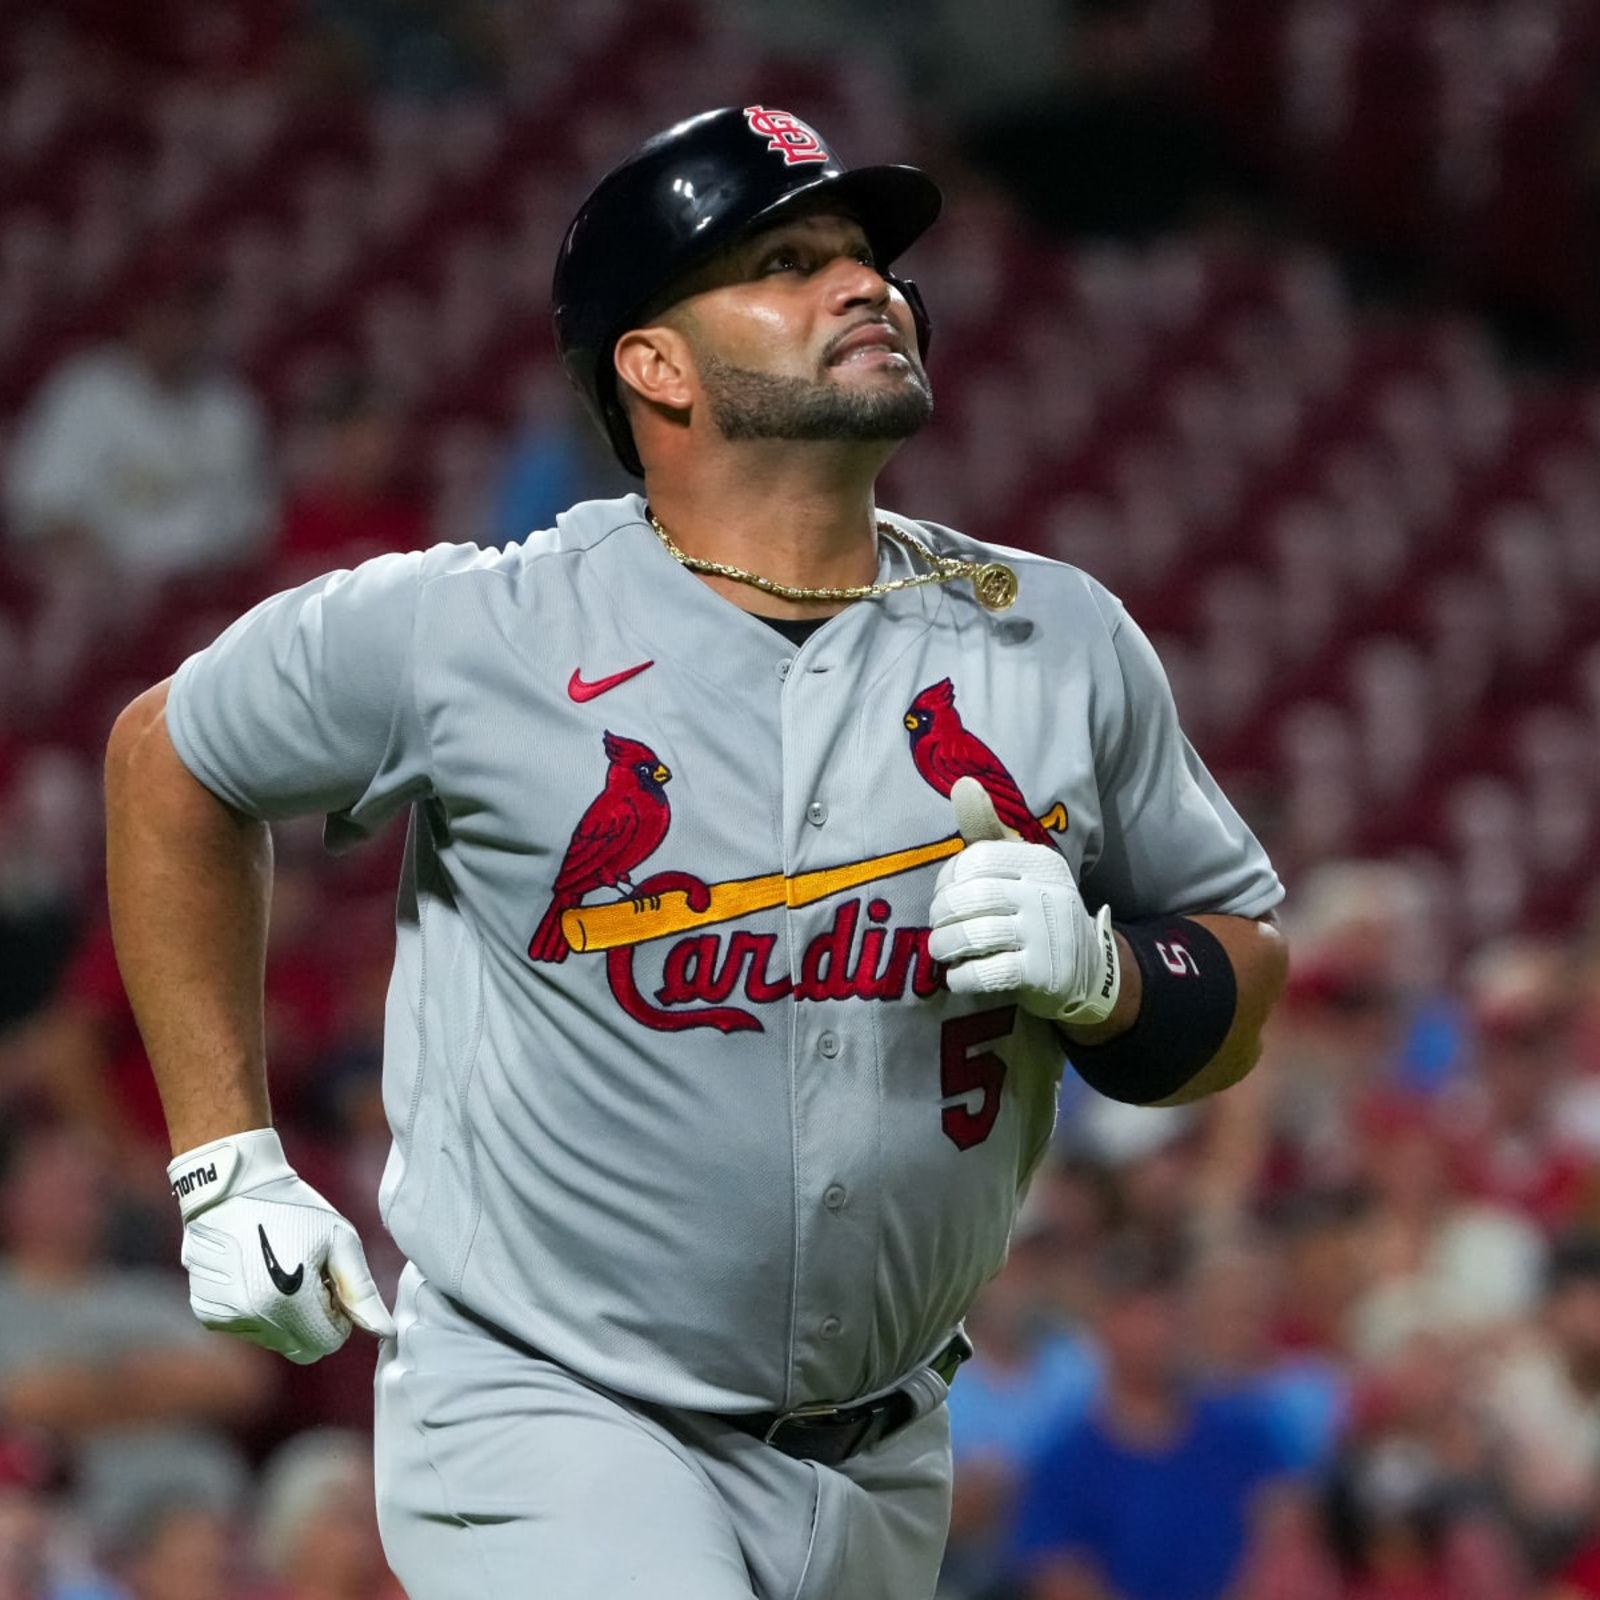 MLB on X: The Machine makes 4. Albert Pujols is officially a